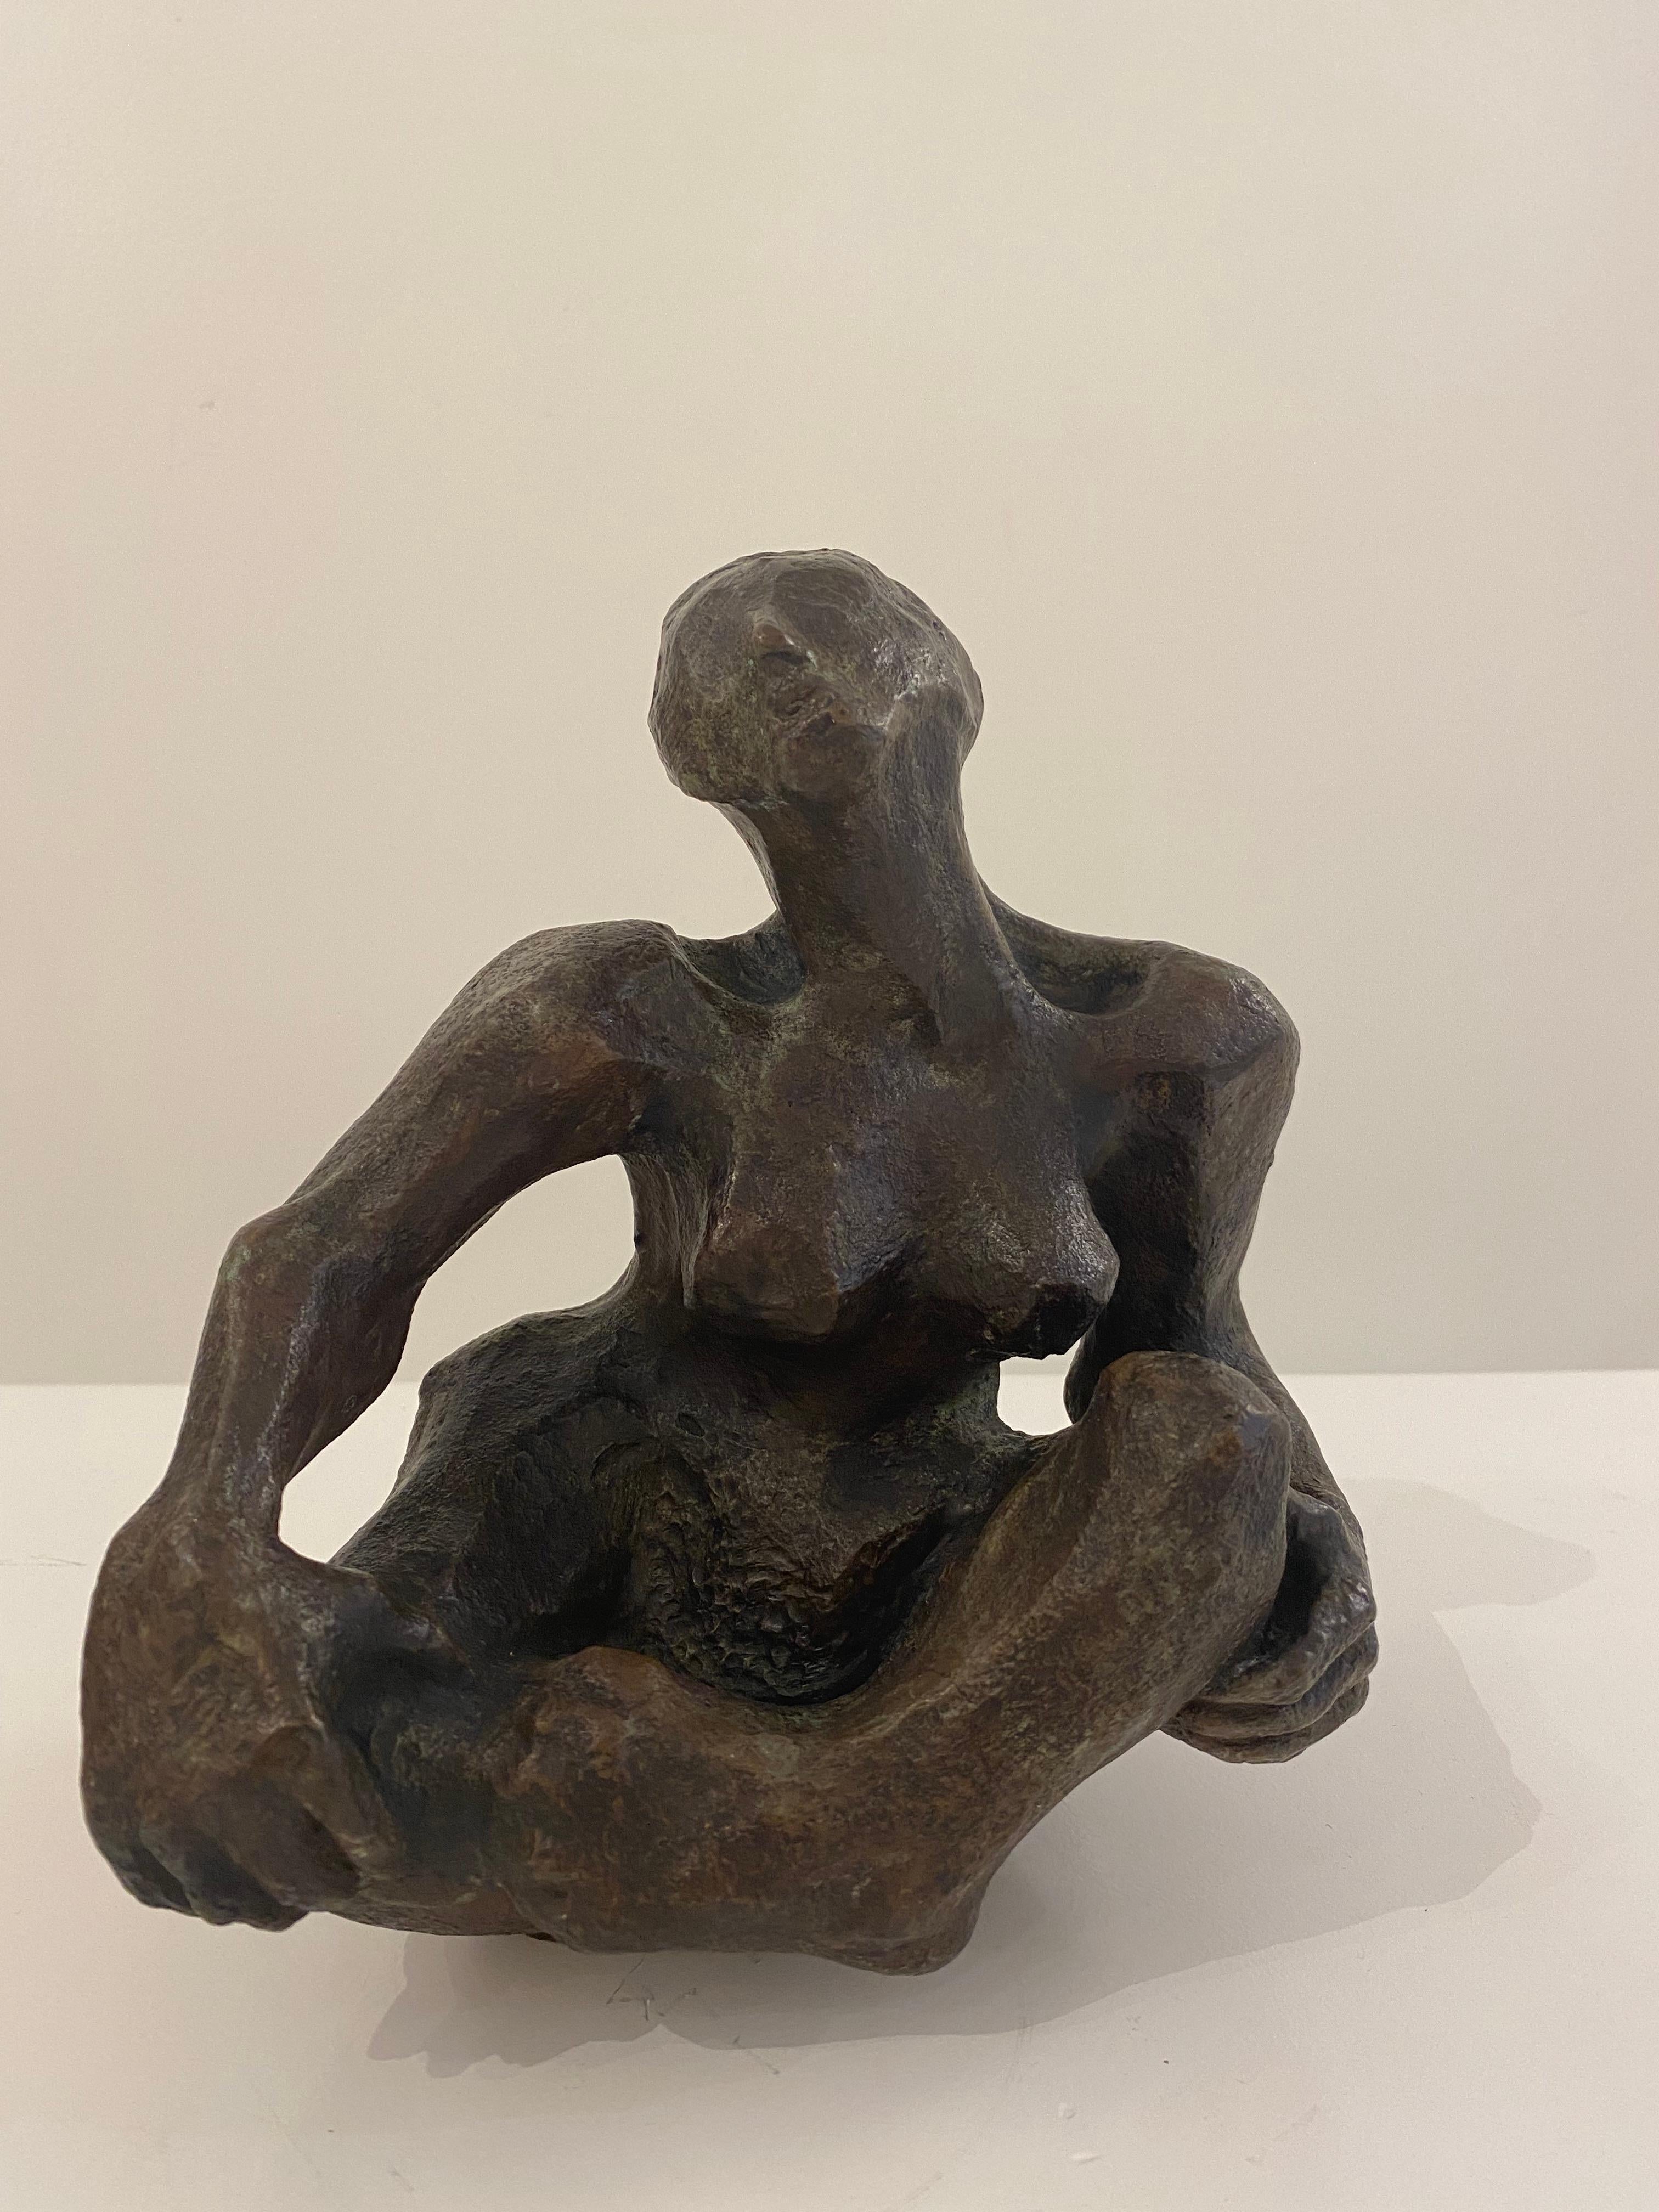 This is a patinated bronze abstract seated female figure. Distinctly patinated in a deep, rich brown, this sculpture drawS much attention! This work depicts a woman in a seated fashion with her hands on her knees. She appears to be leaning on to her